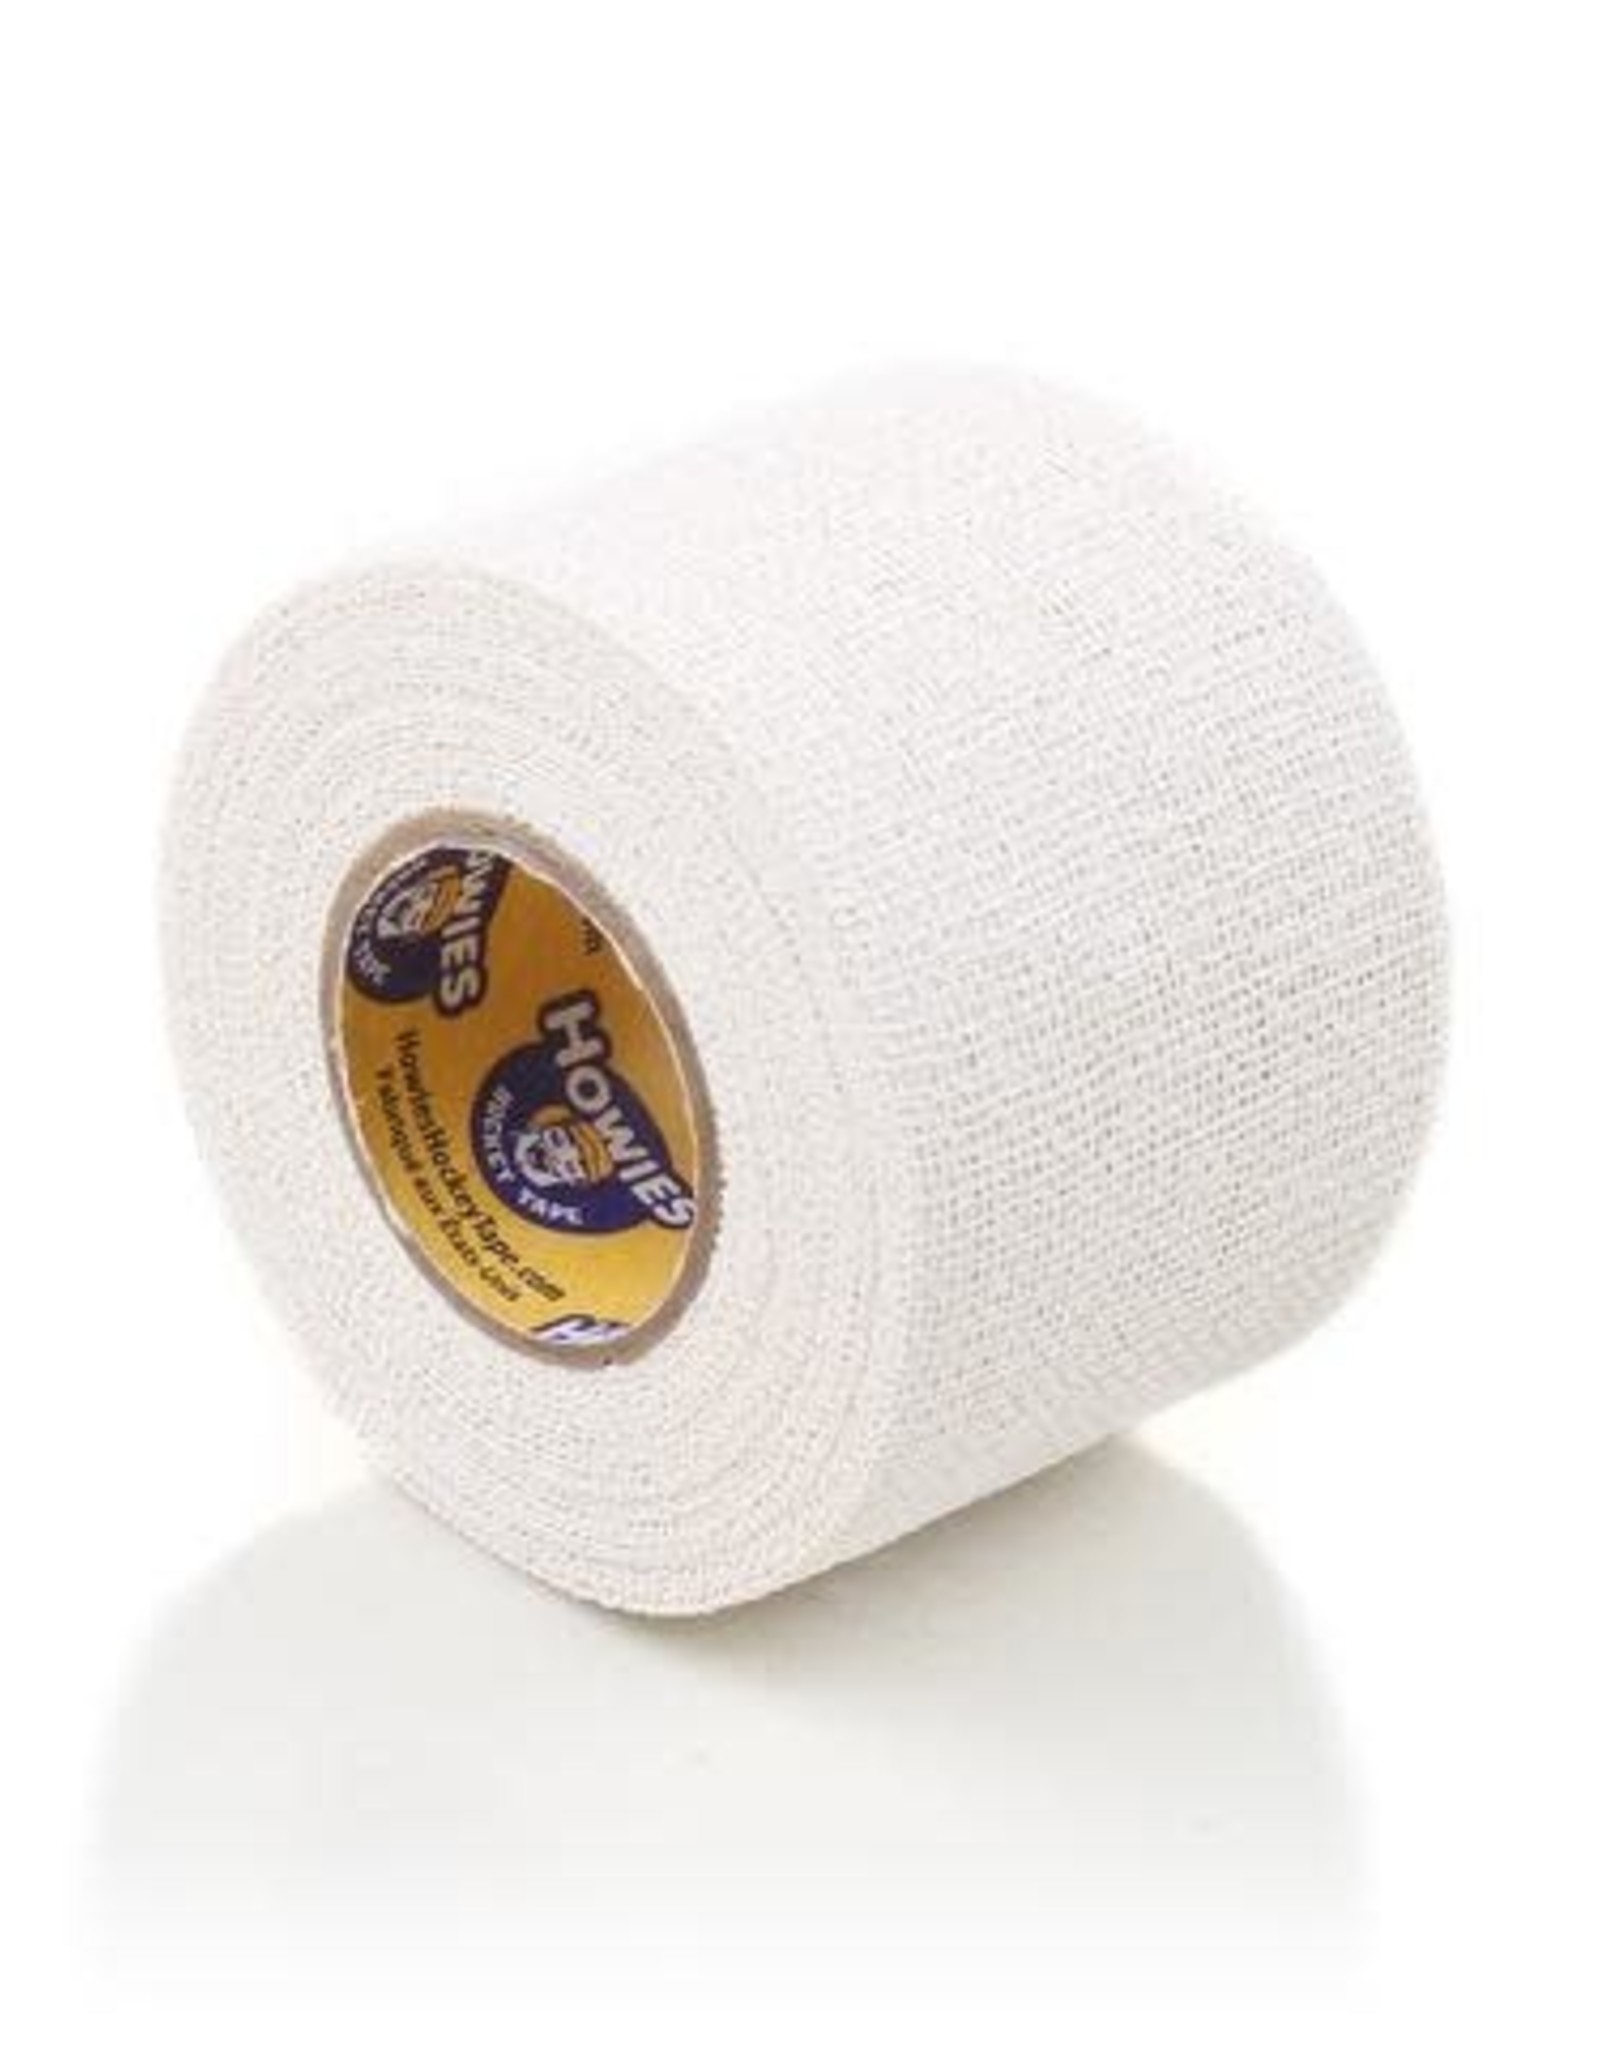 Howies Howies Pro Grip Hockey Tape (WHITE)